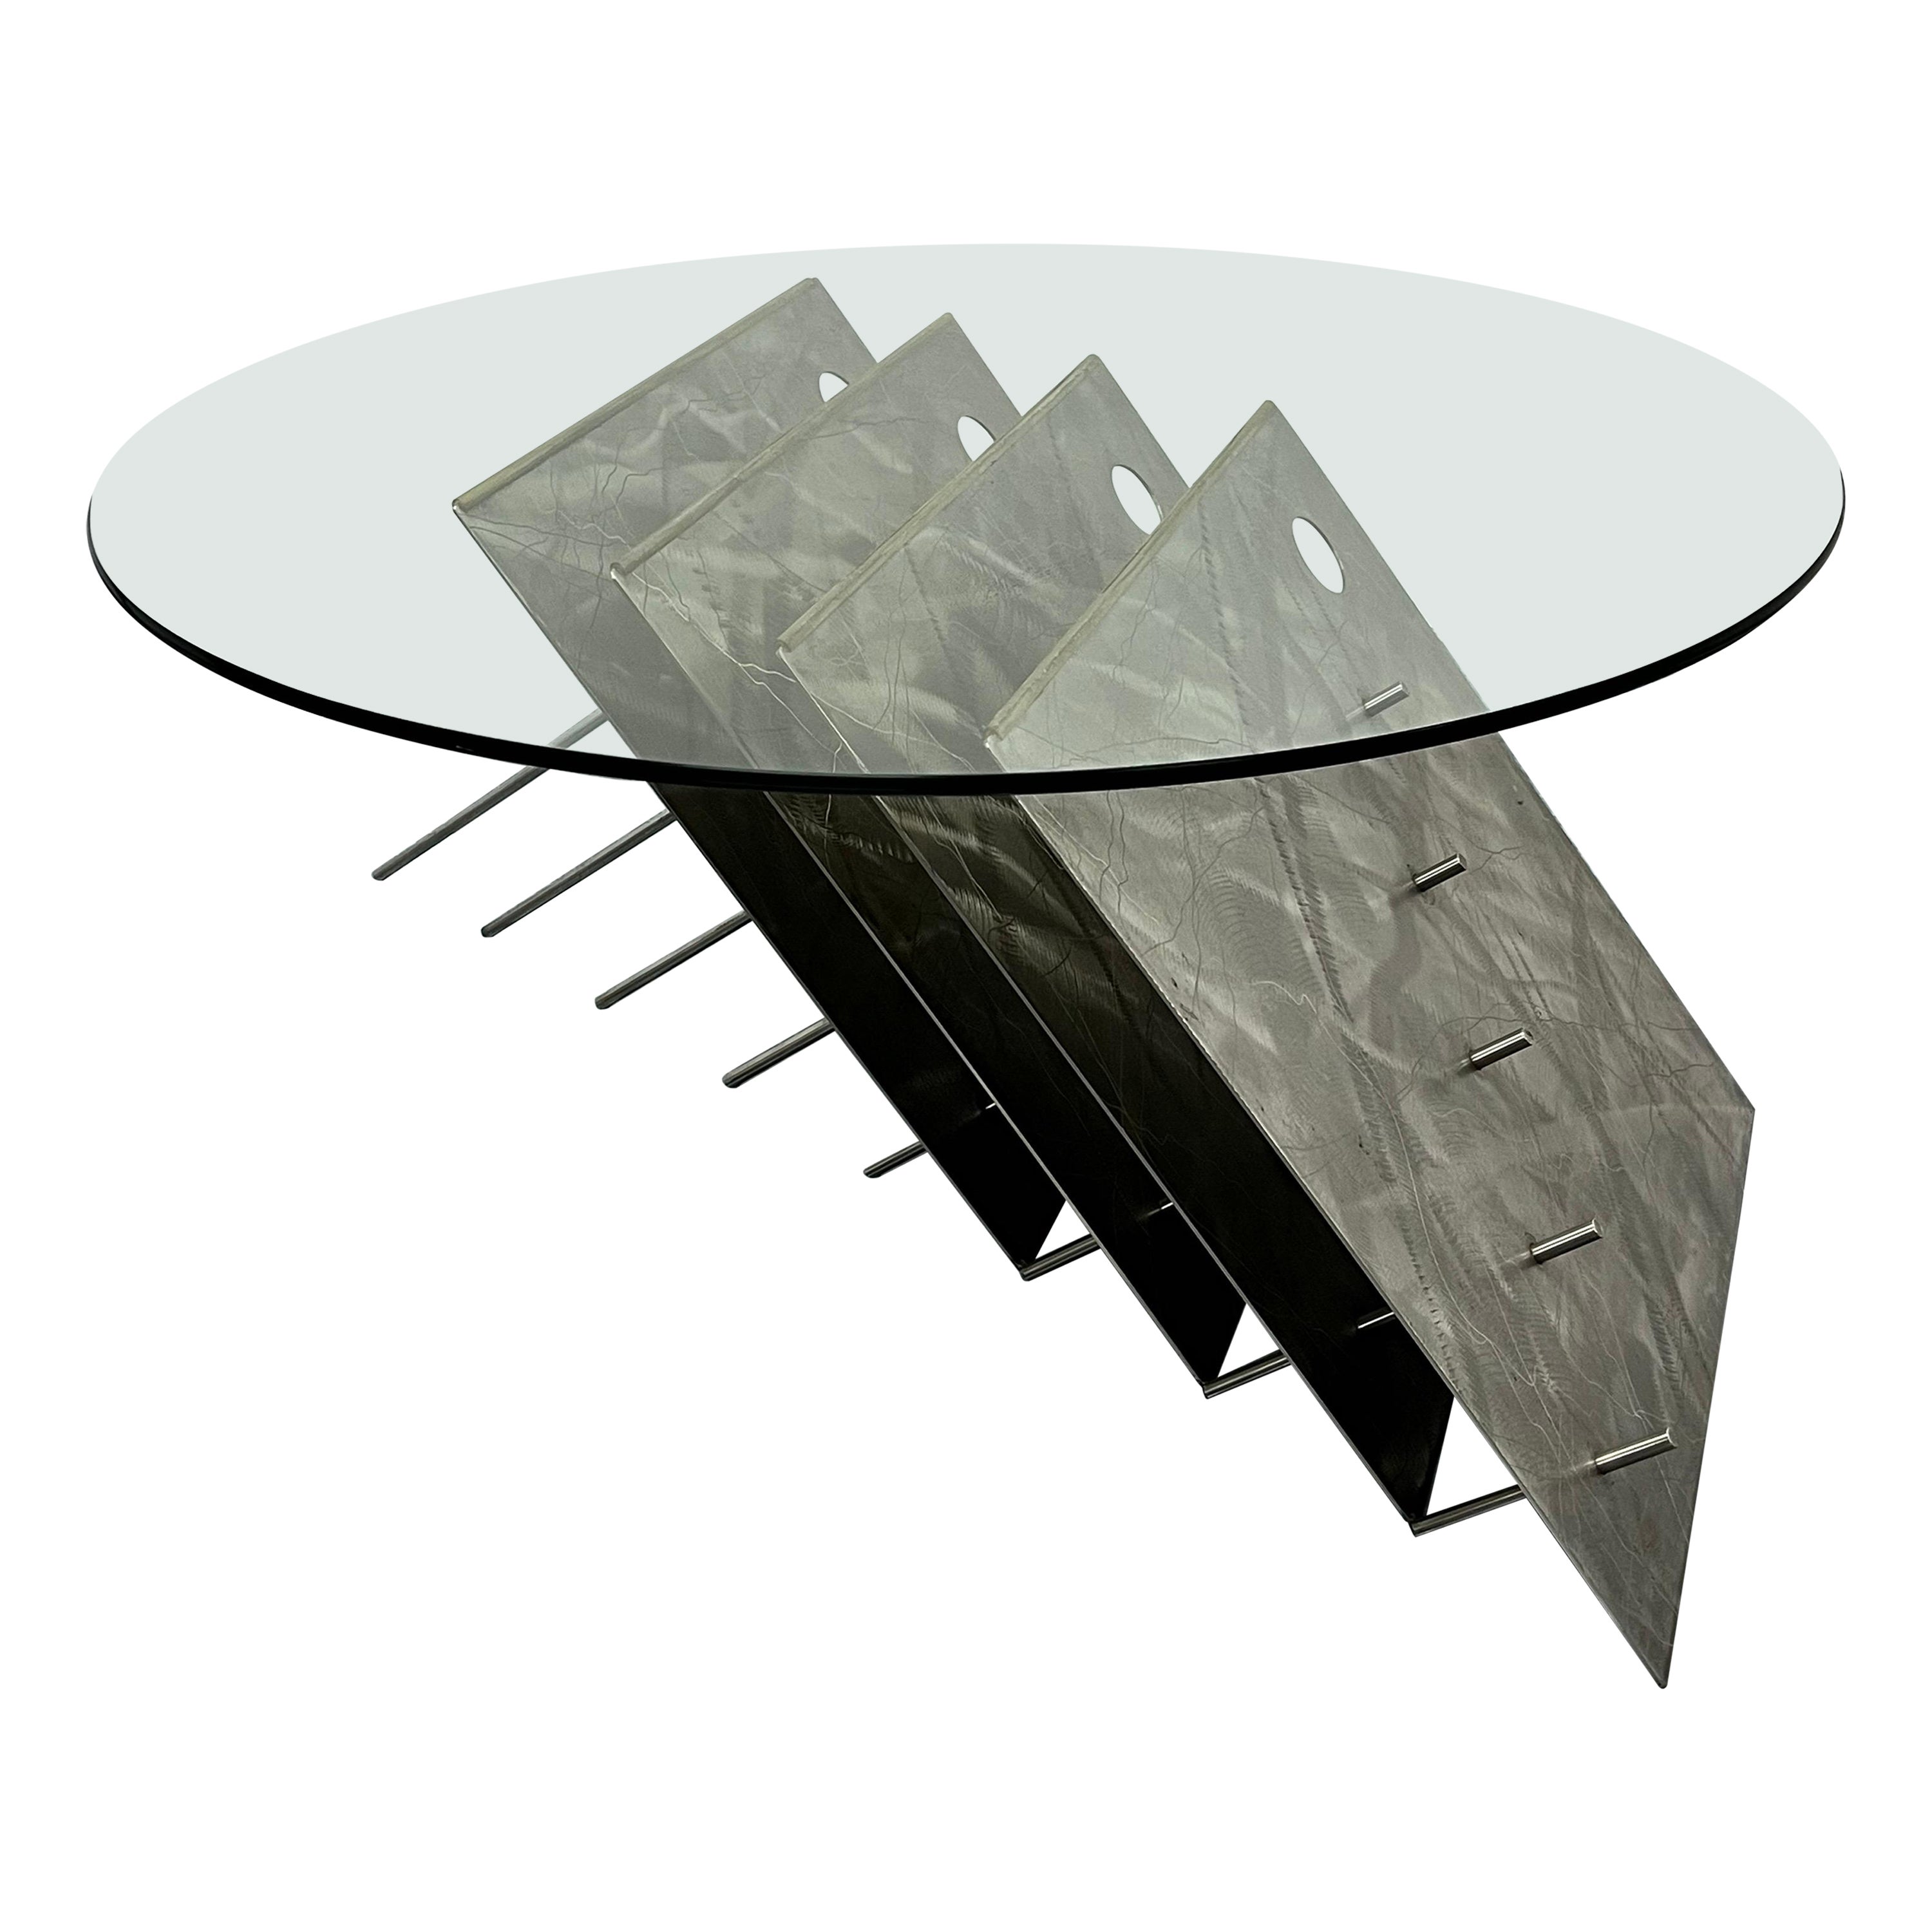 American Contemporary Custom Made Steel and Glass Art Coffee Table, USA 1990s For Sale